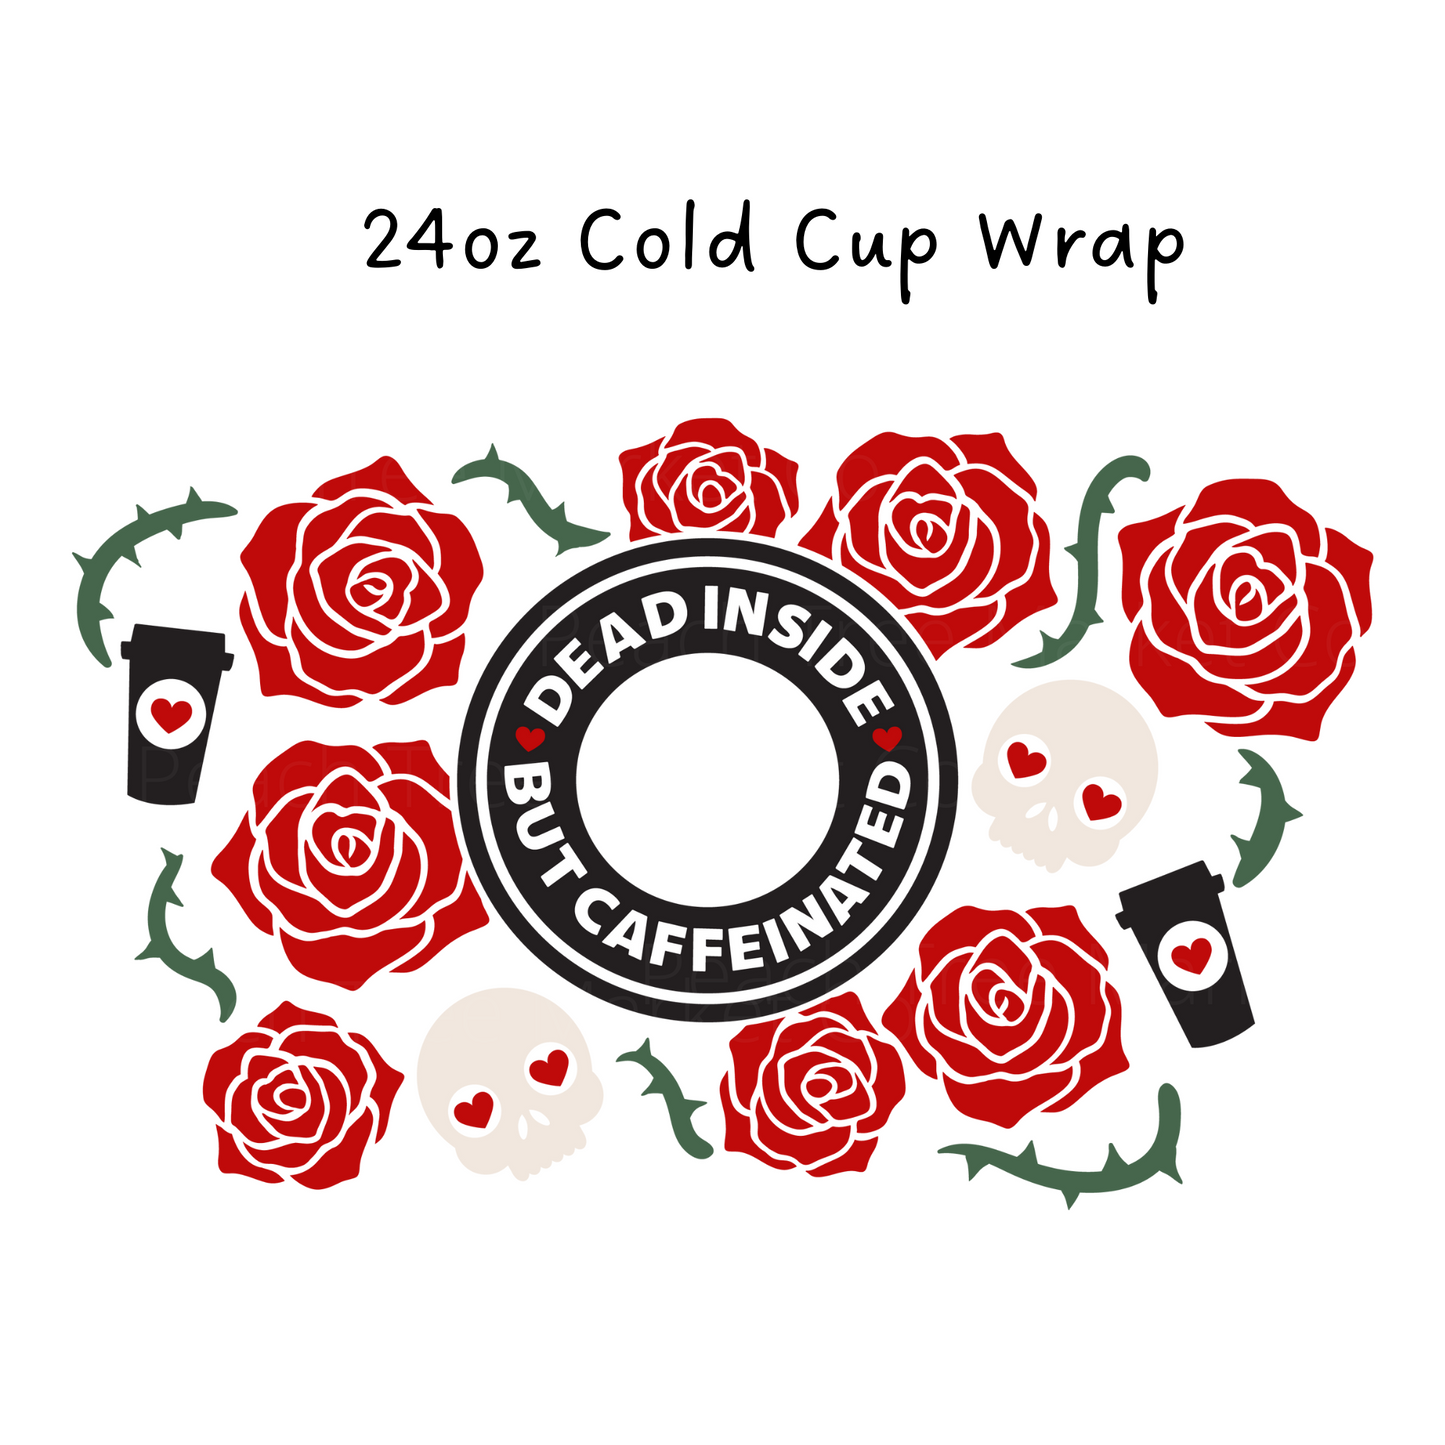 Dead Inside But Caffeinated 24 OZ Cold Cup Wrap